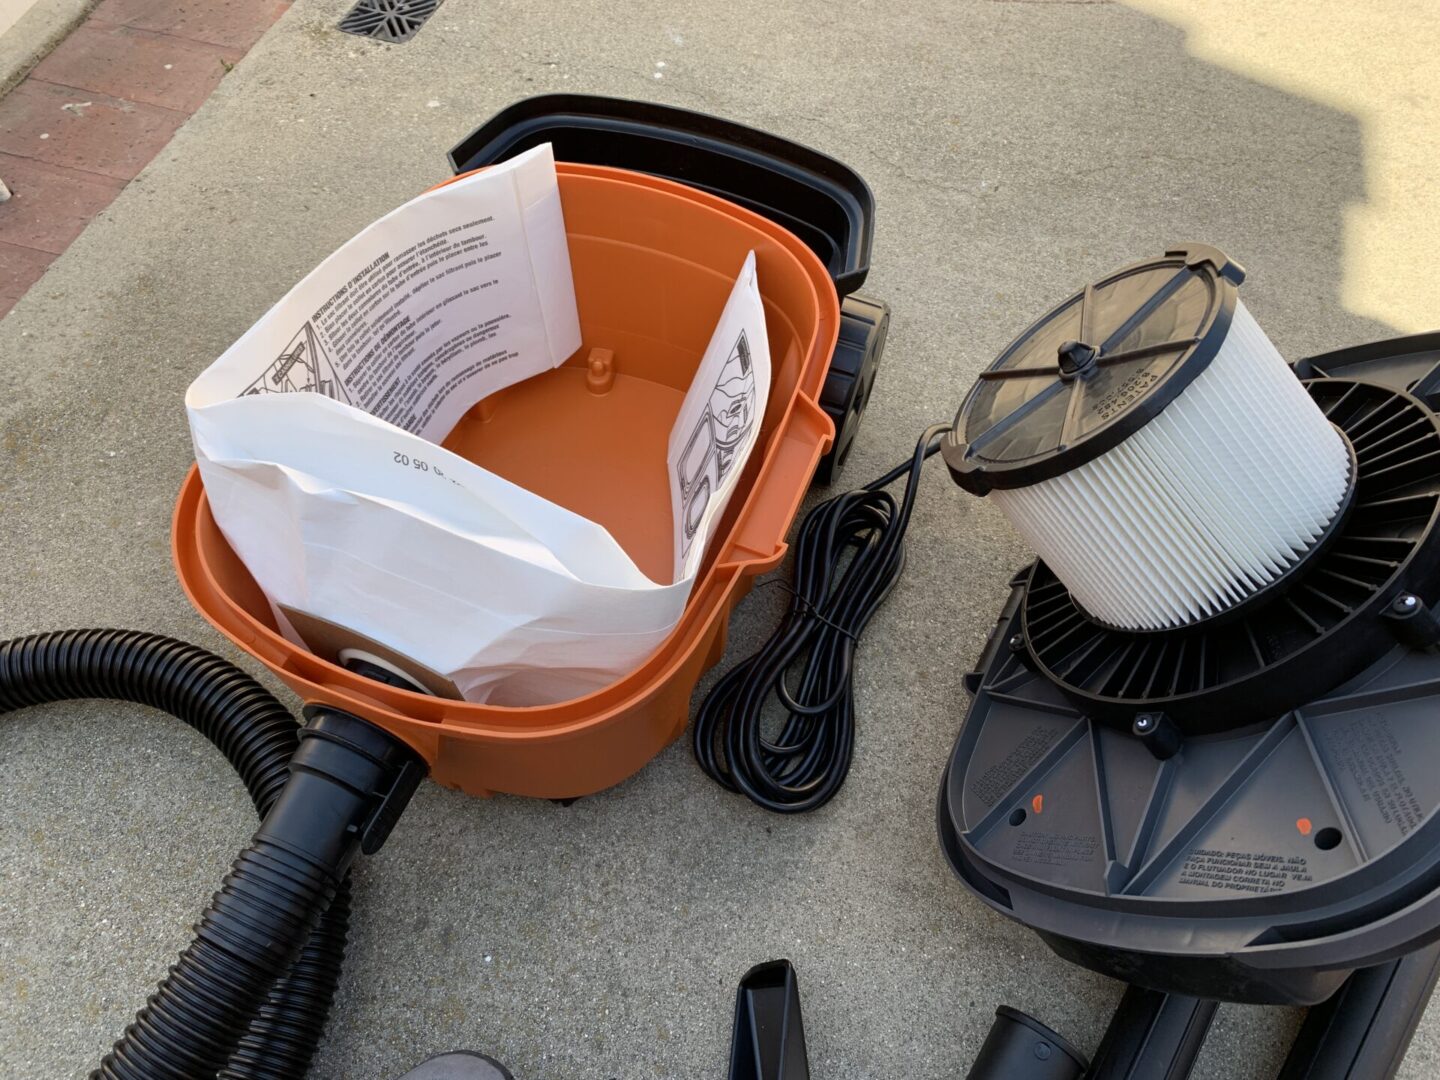 RIDGID's 4-gallon wet/dry shop vac comes with a car cleaning kit